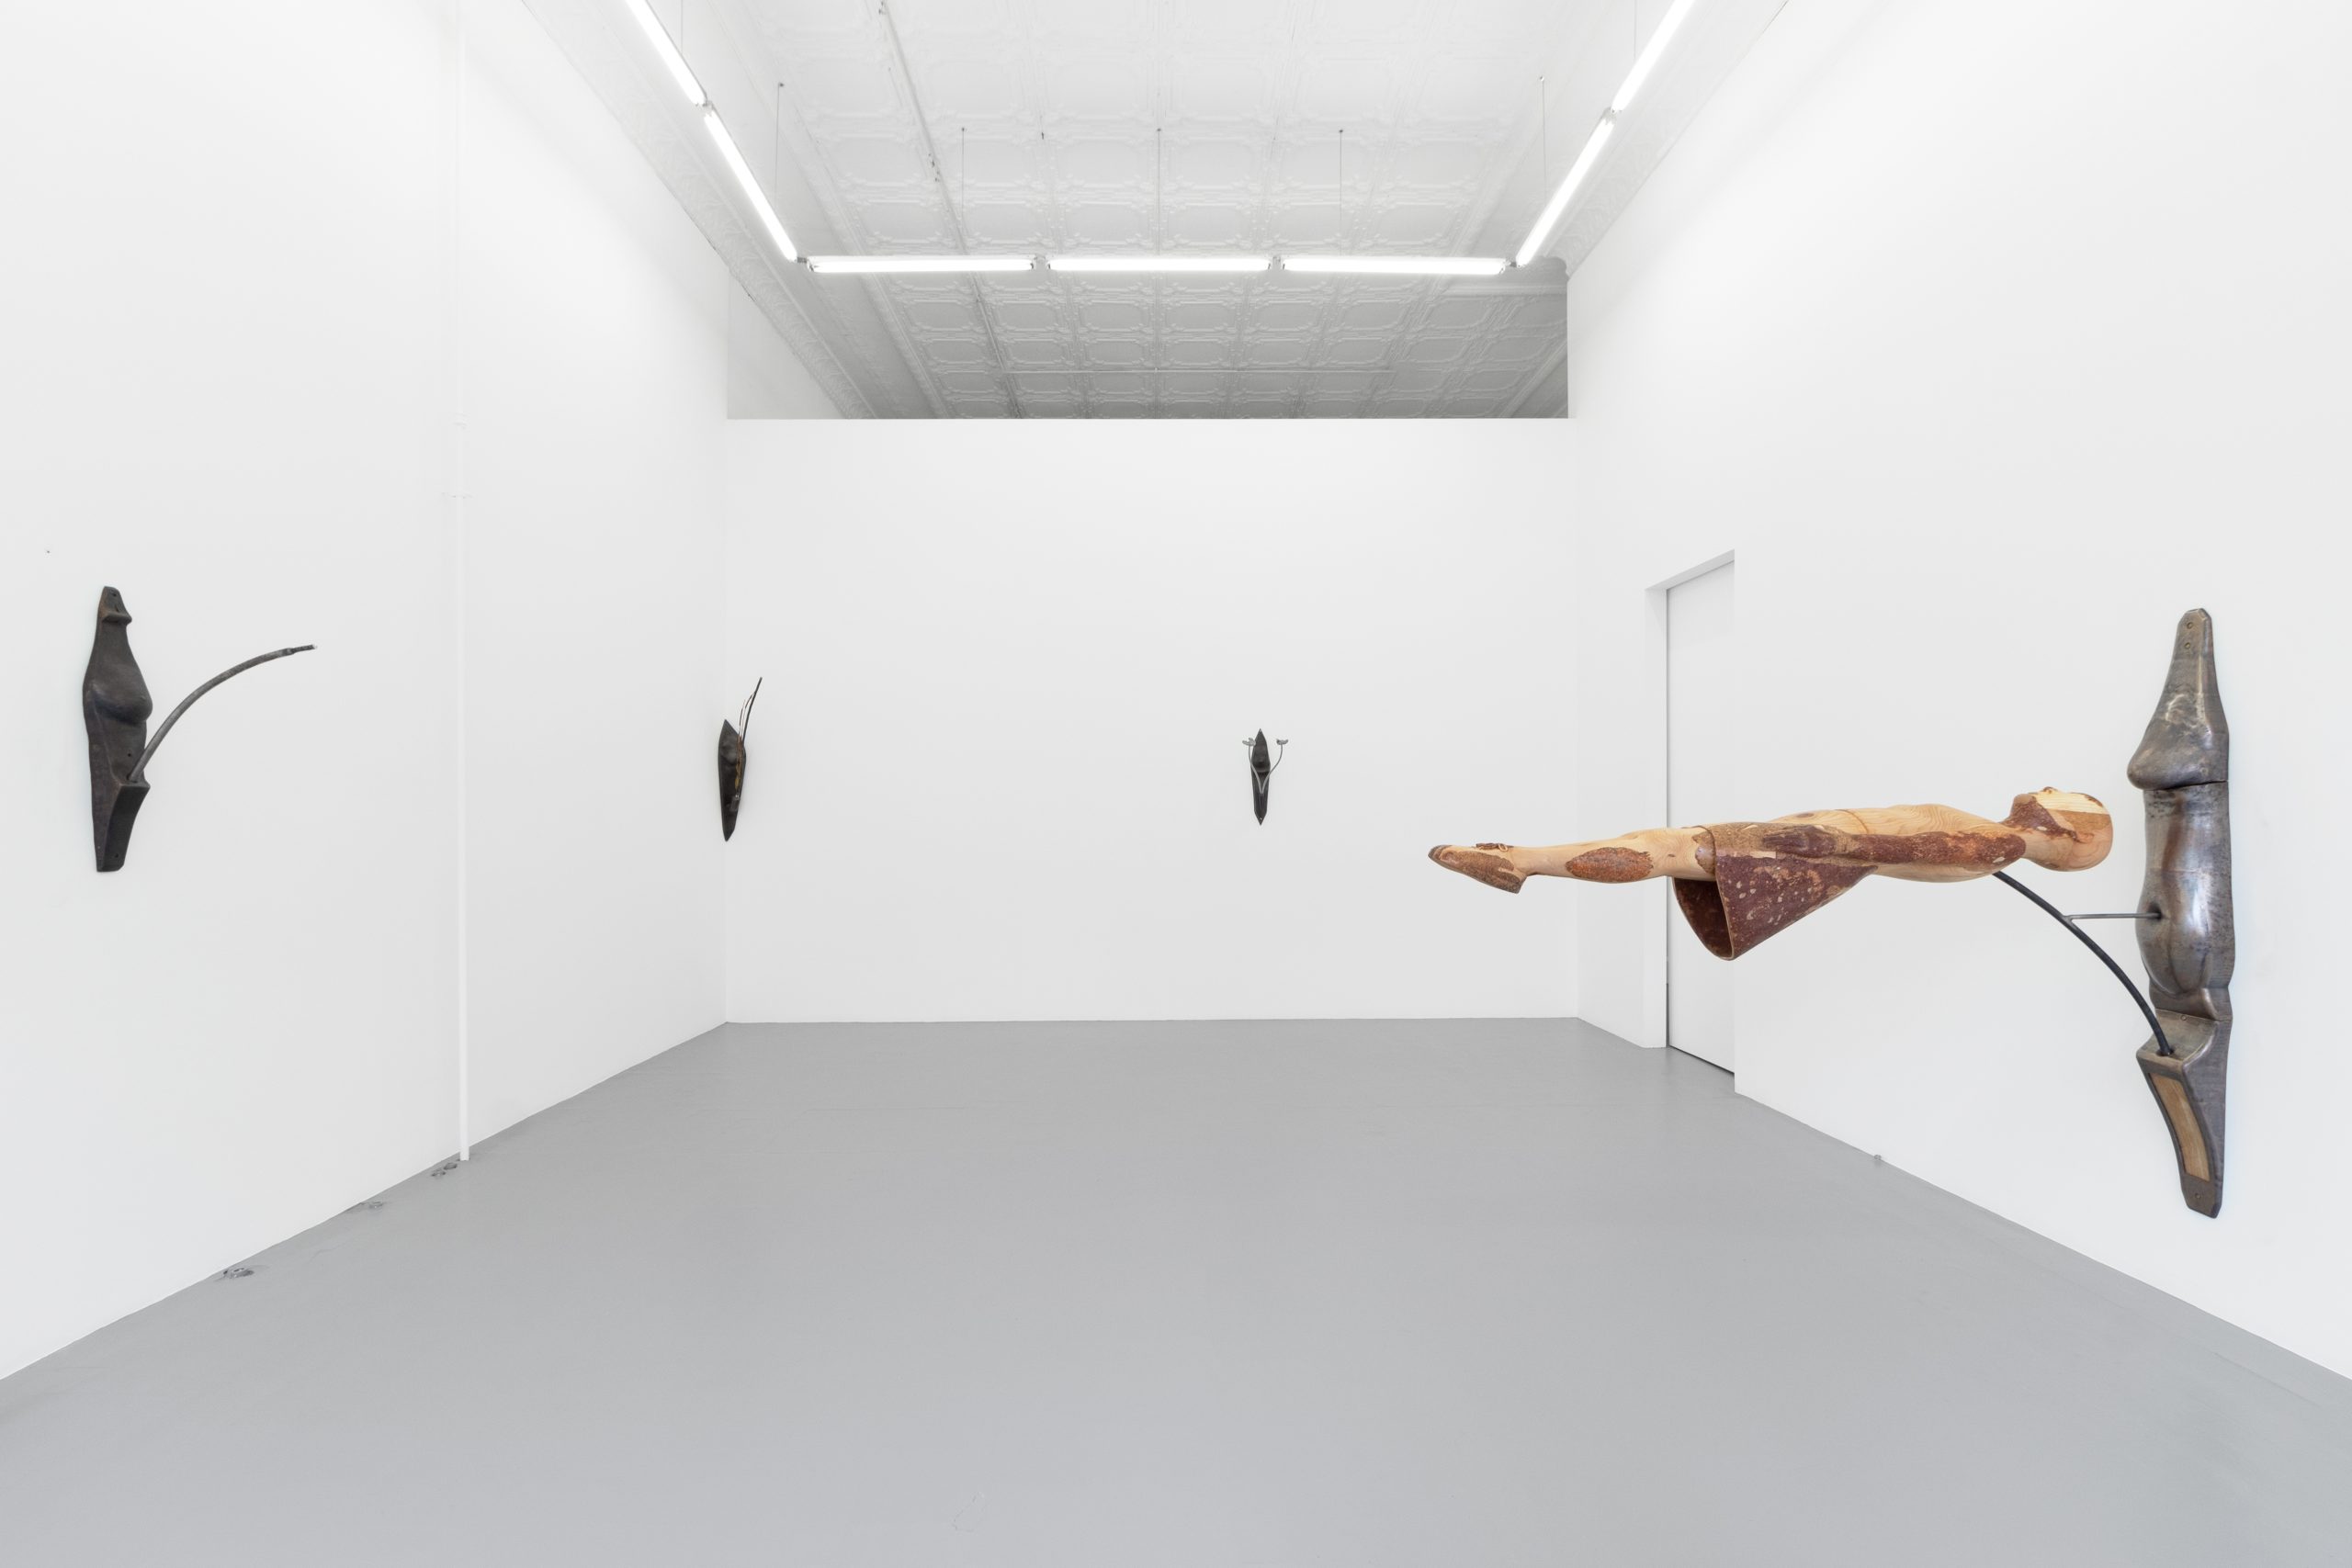 Image: Installation view of Basket Toss. A girl made from bronze and wood floats horizontally, affixed to the righthand wall. Metal breasts dot the other two walls, intertwined with mushrooms and cattails.